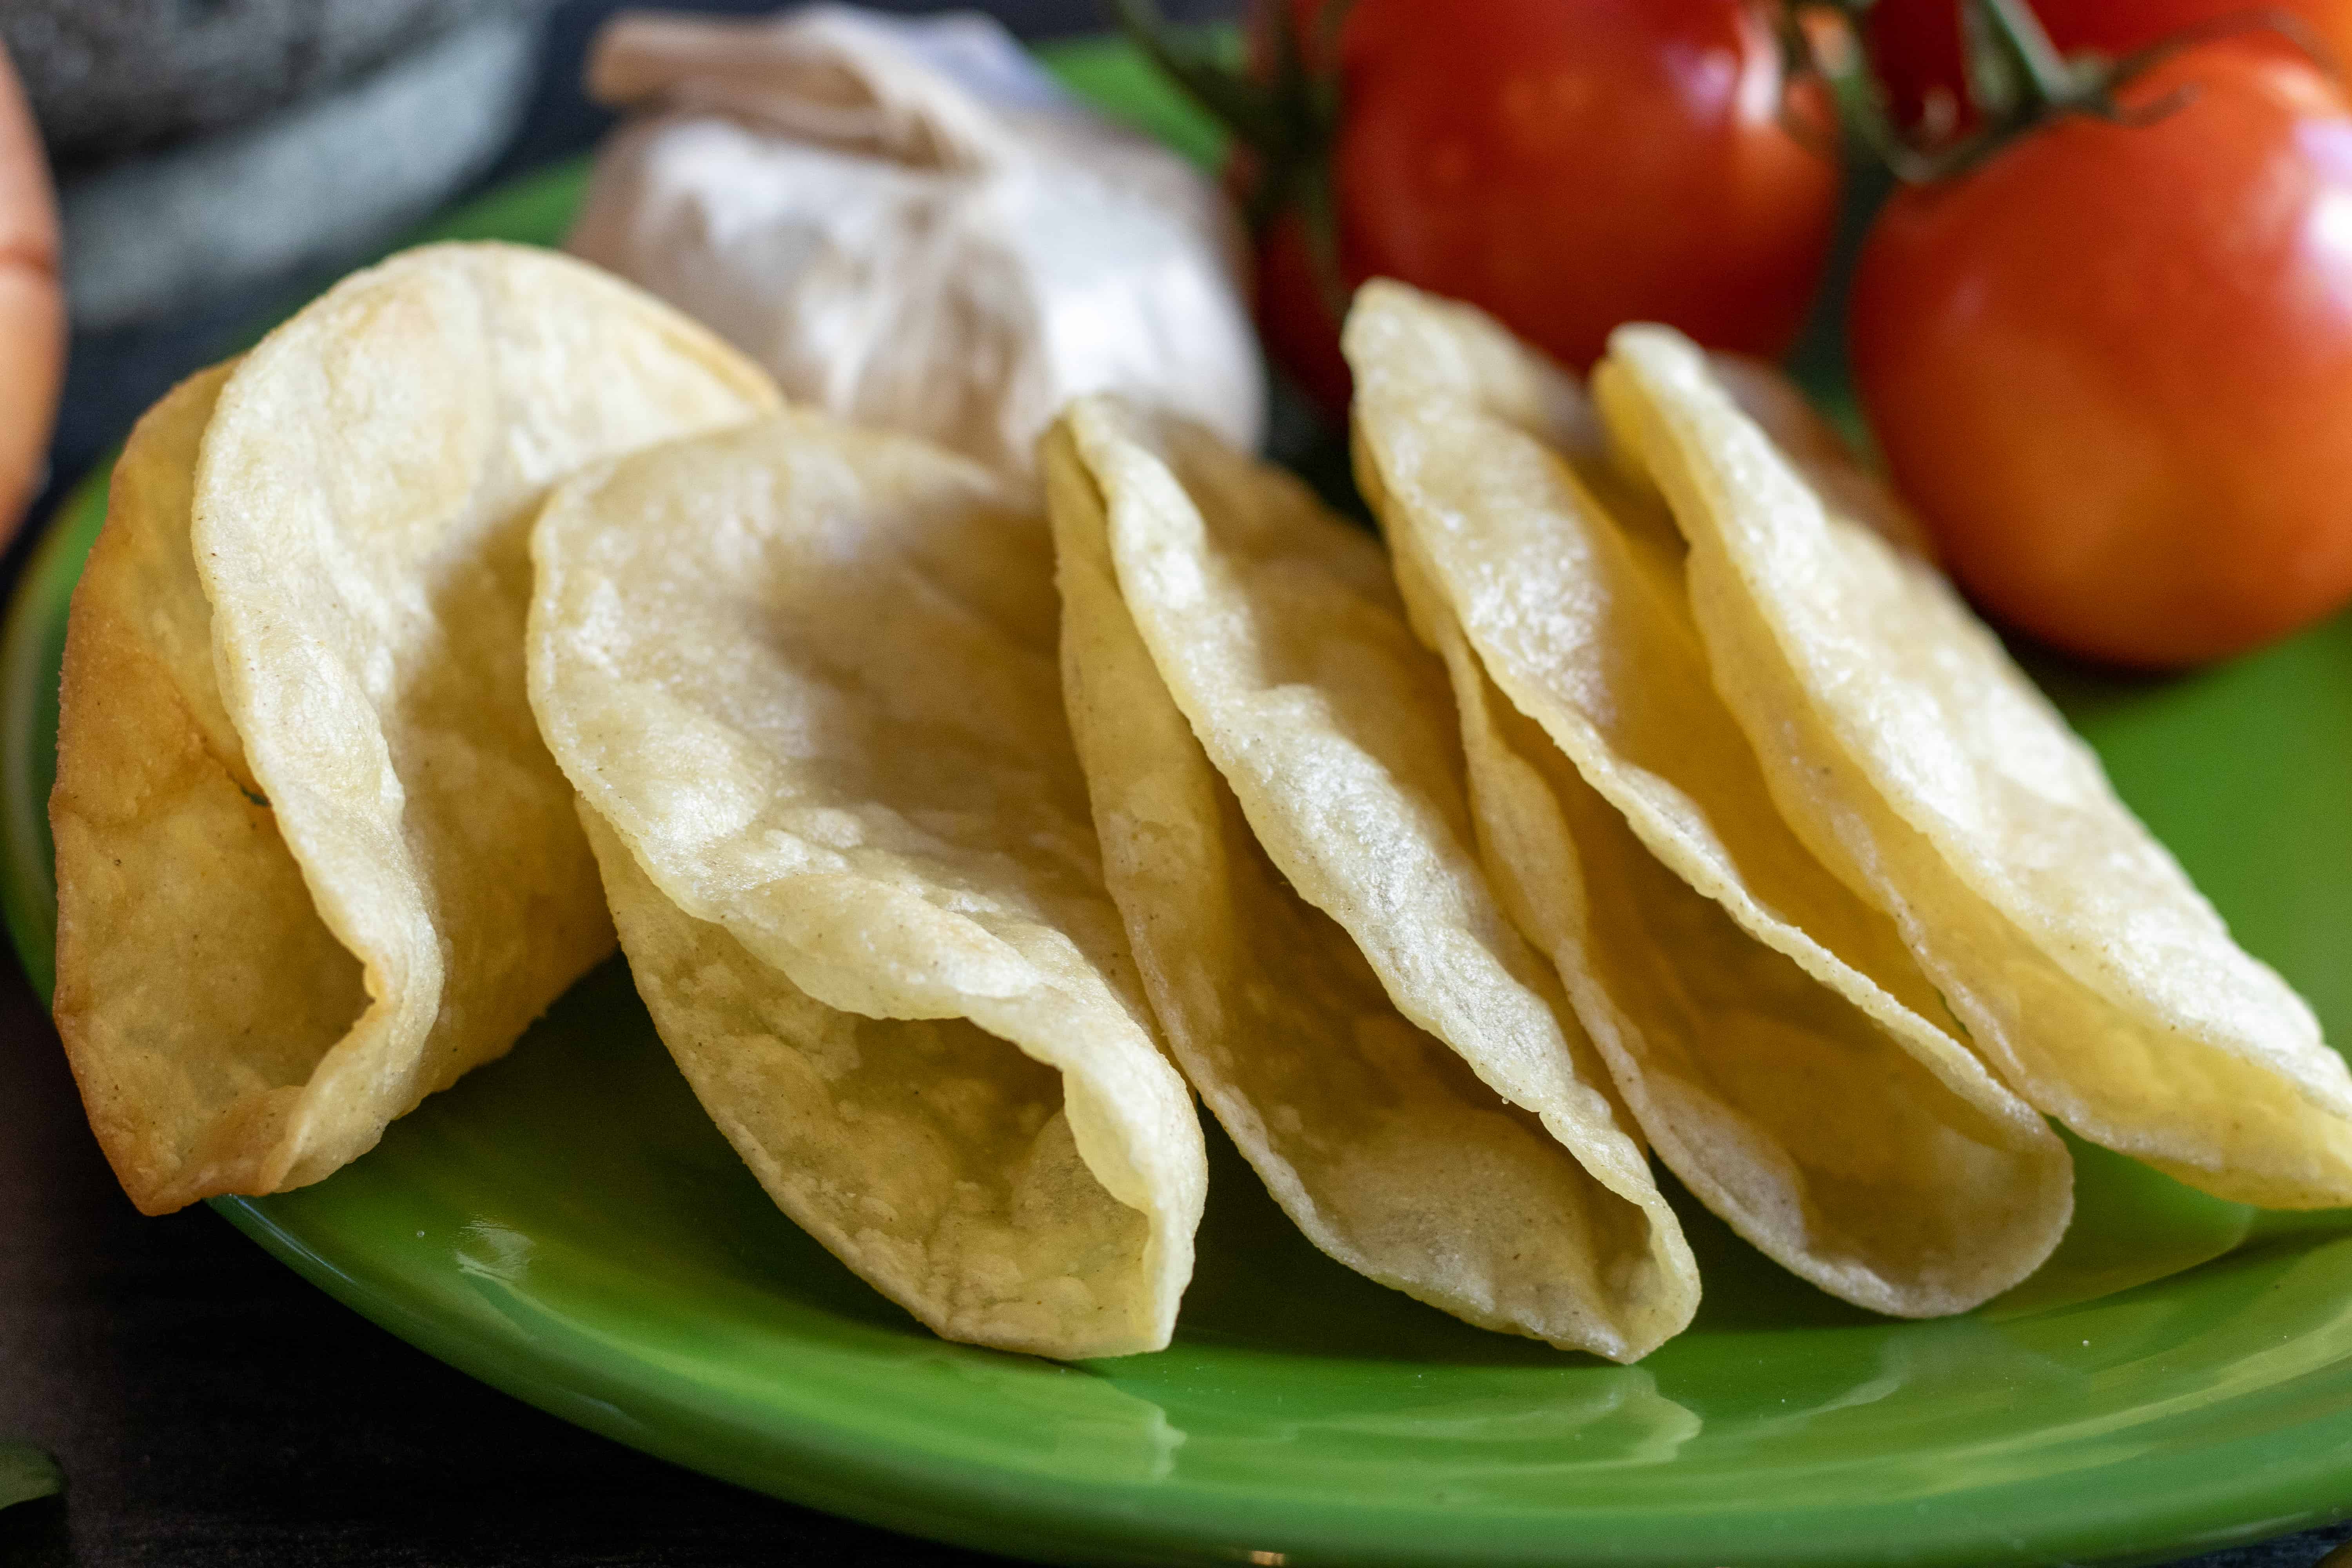 https://travelinginmykitchen.com/wp-content/uploads/2022/03/Line-of-Fried-Taco-Shells-Made-with-Corn-Tortillas.jpg